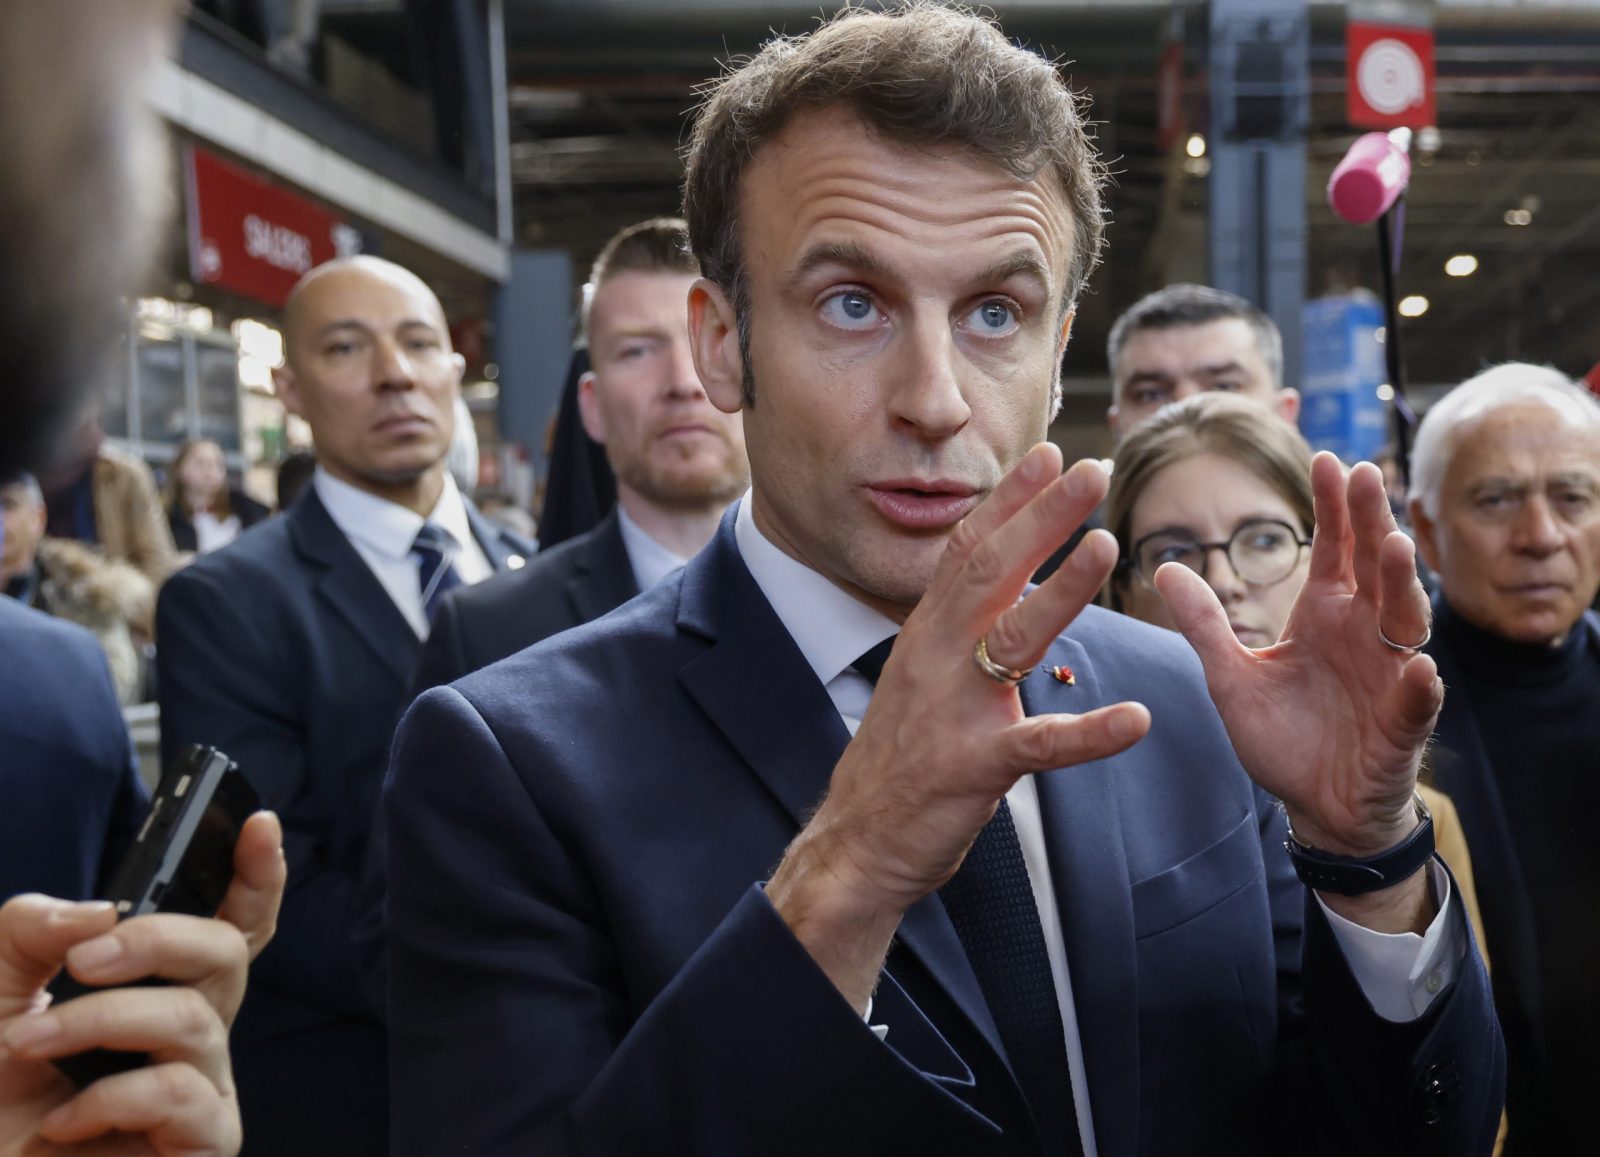 epa10489866 France's President Emmanuel Macron (C), flanked by 'Renaissance' senator Francois Patriat (R), gestures as he visits the 59th edition of the Agriculture fair on its inauguration day in Paris, France, 25 February 2023.  The 2023 edition of the International Agriculture Fair takes place in Paris from February 25 till March 5, 2023.  EPA/LUDOVIC MARIN / POOL  MAXPPP OUT